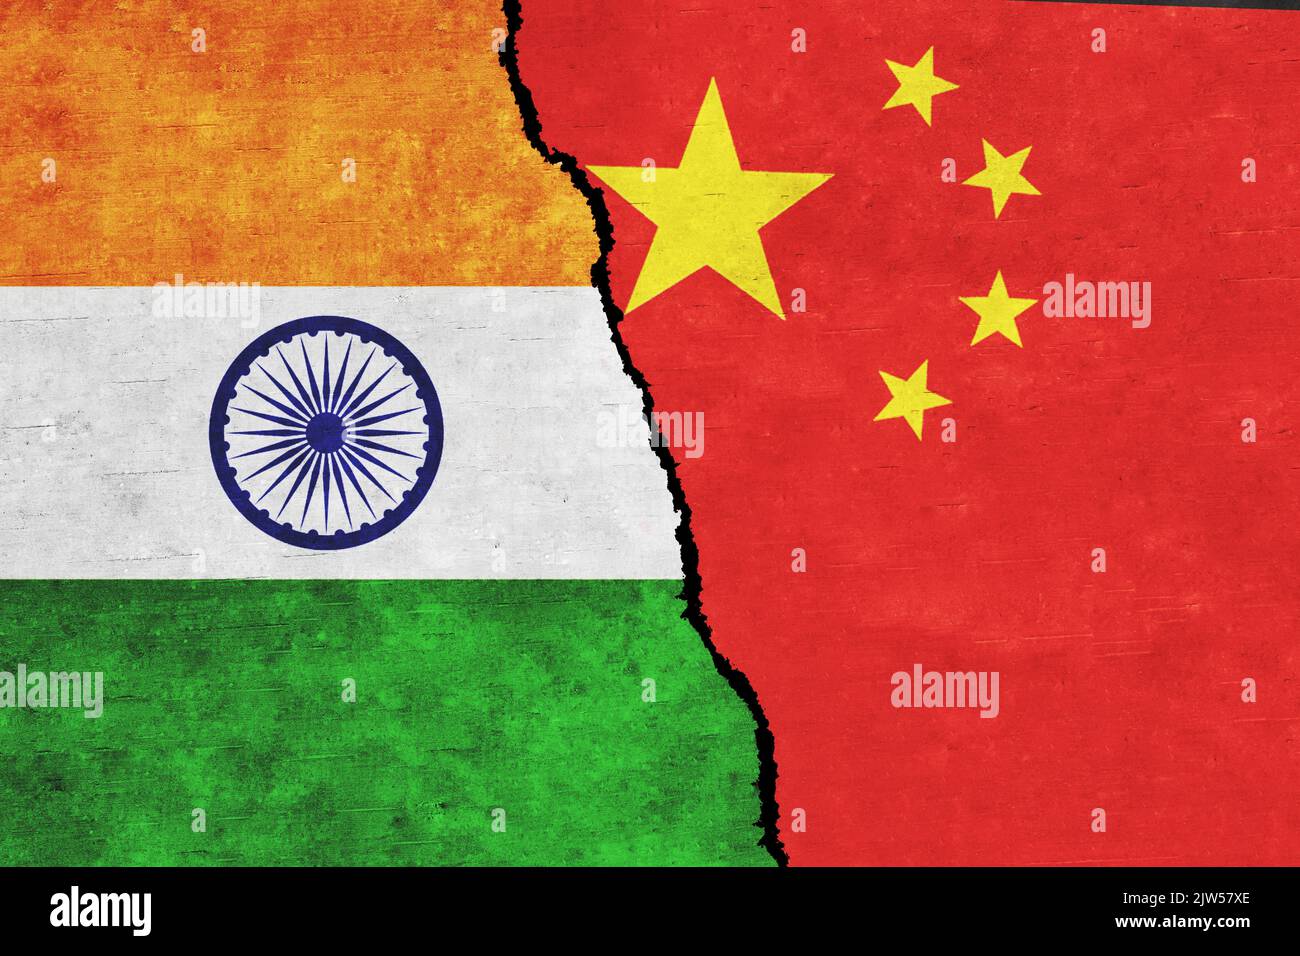 India and China flags together. China and India conflict. China vs India Stock Photo